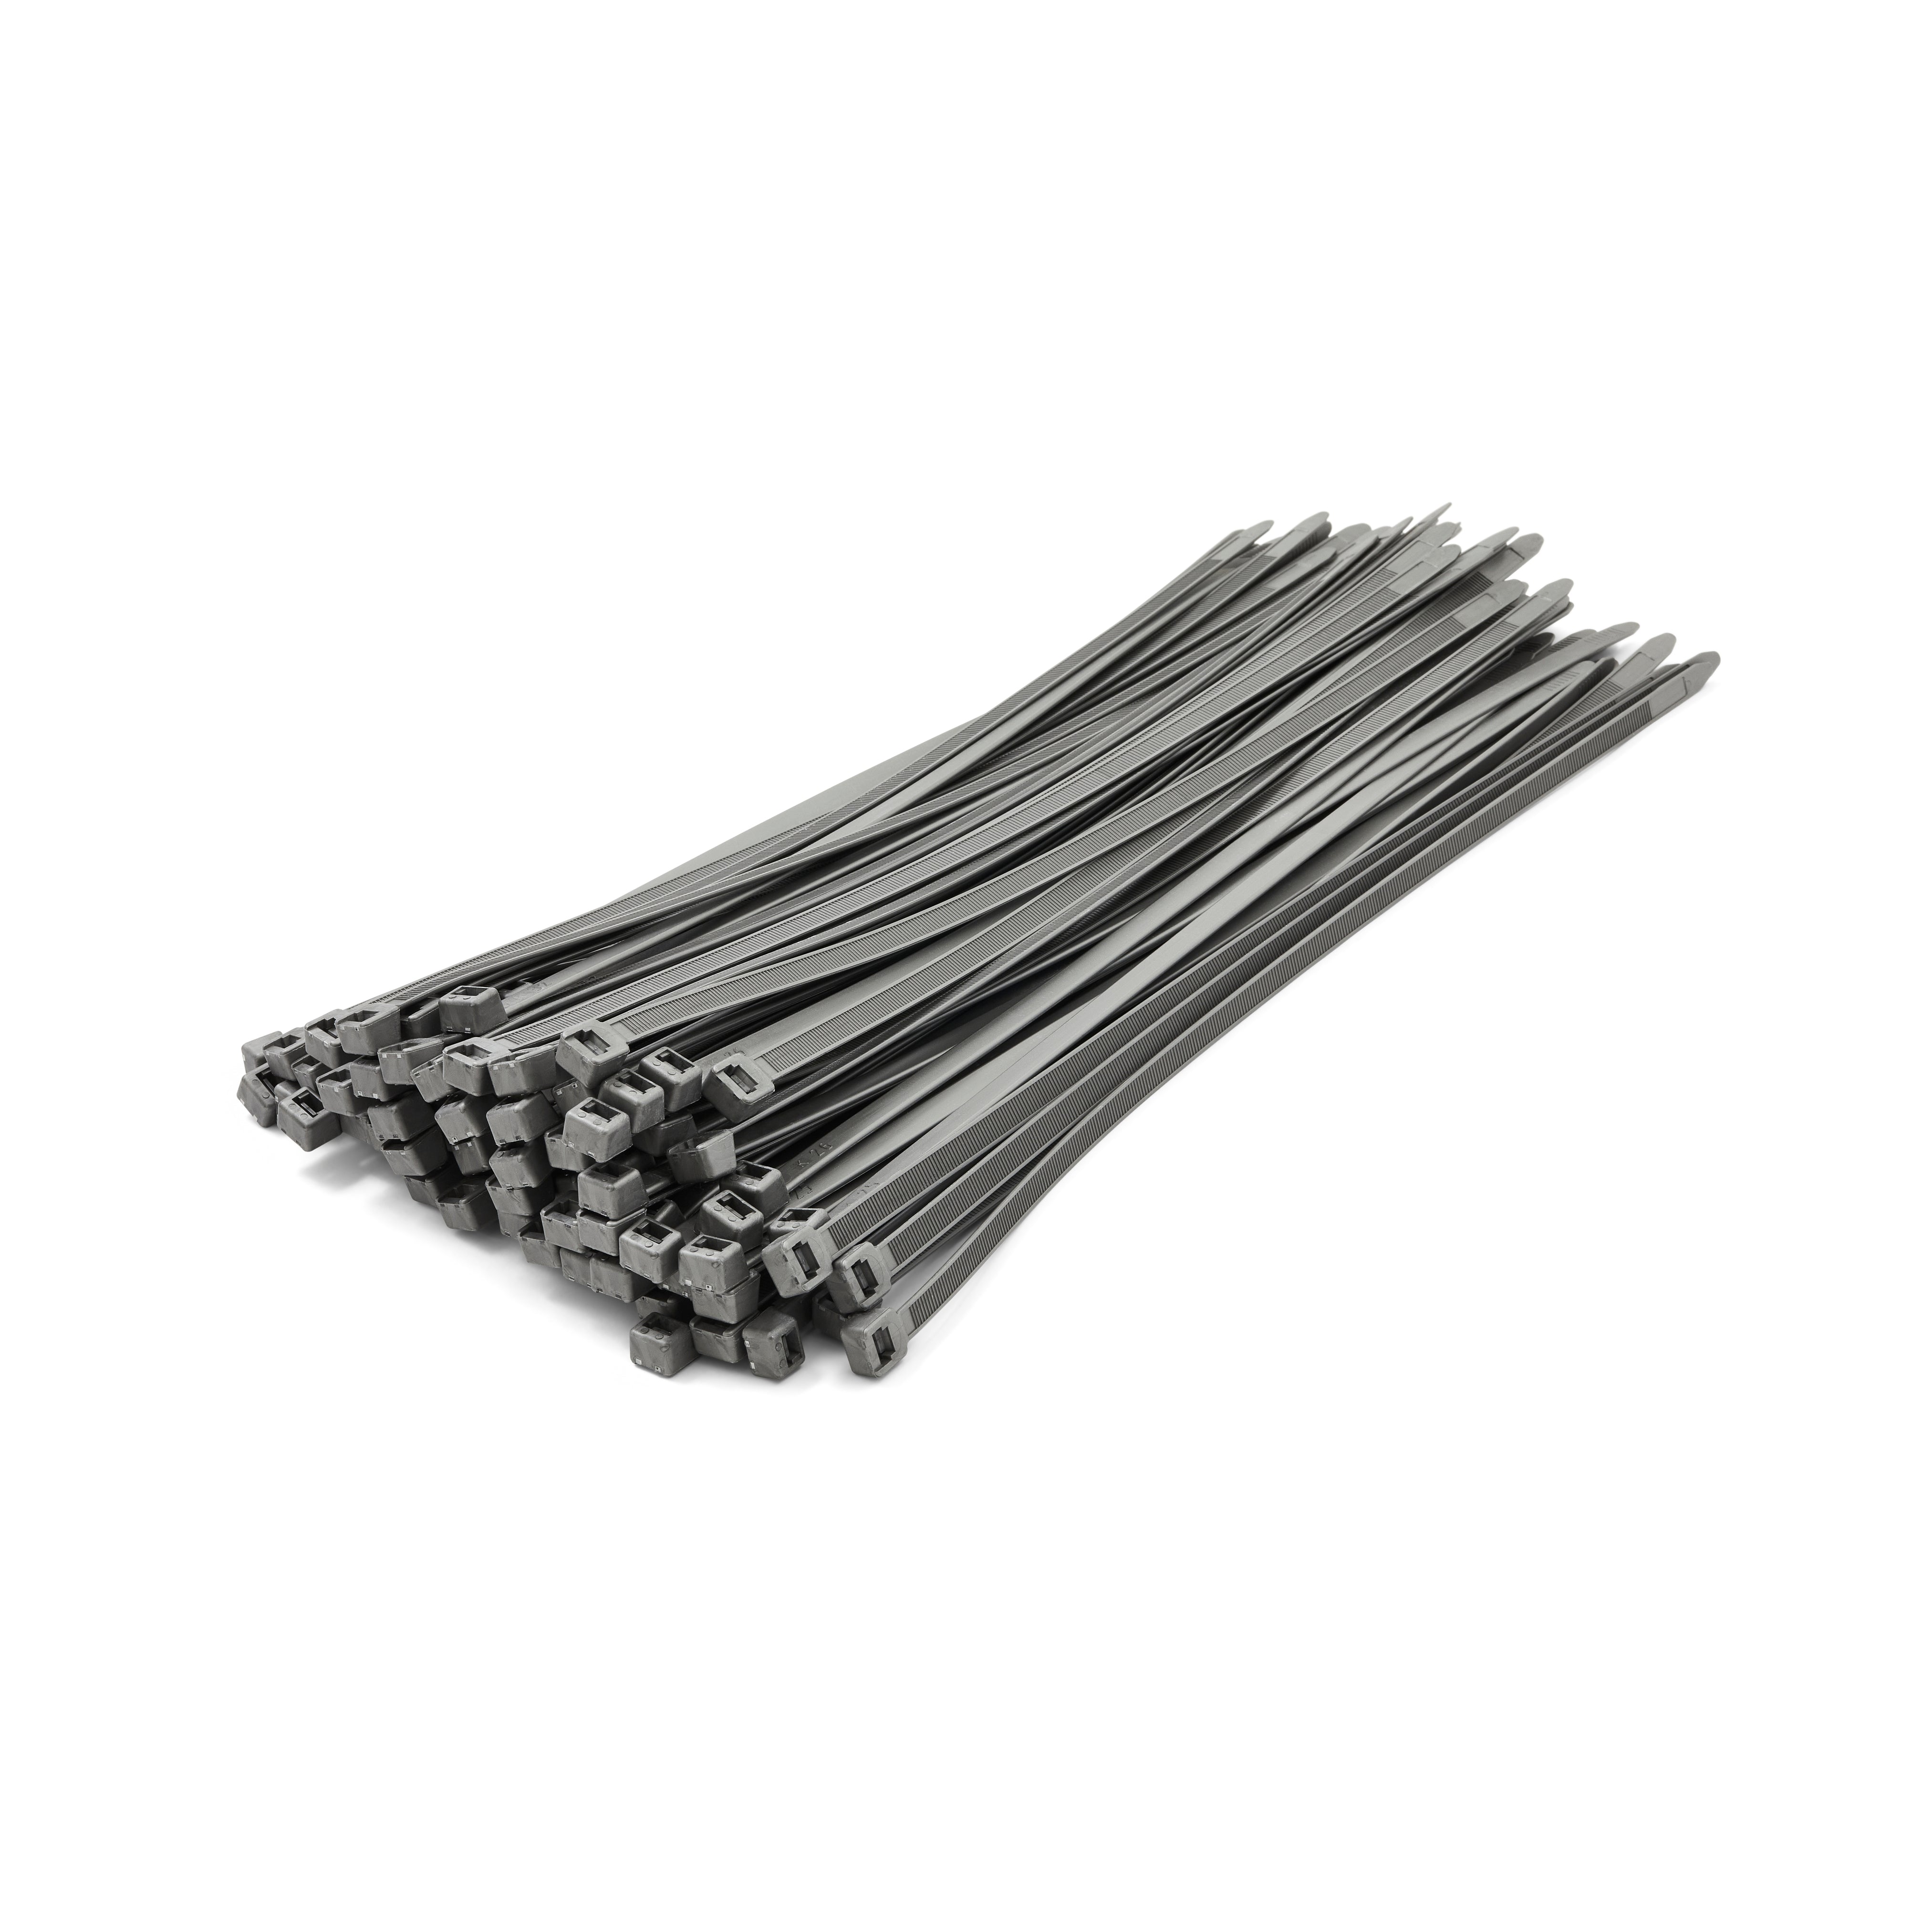 Silver Cable Ties - Pack of 100